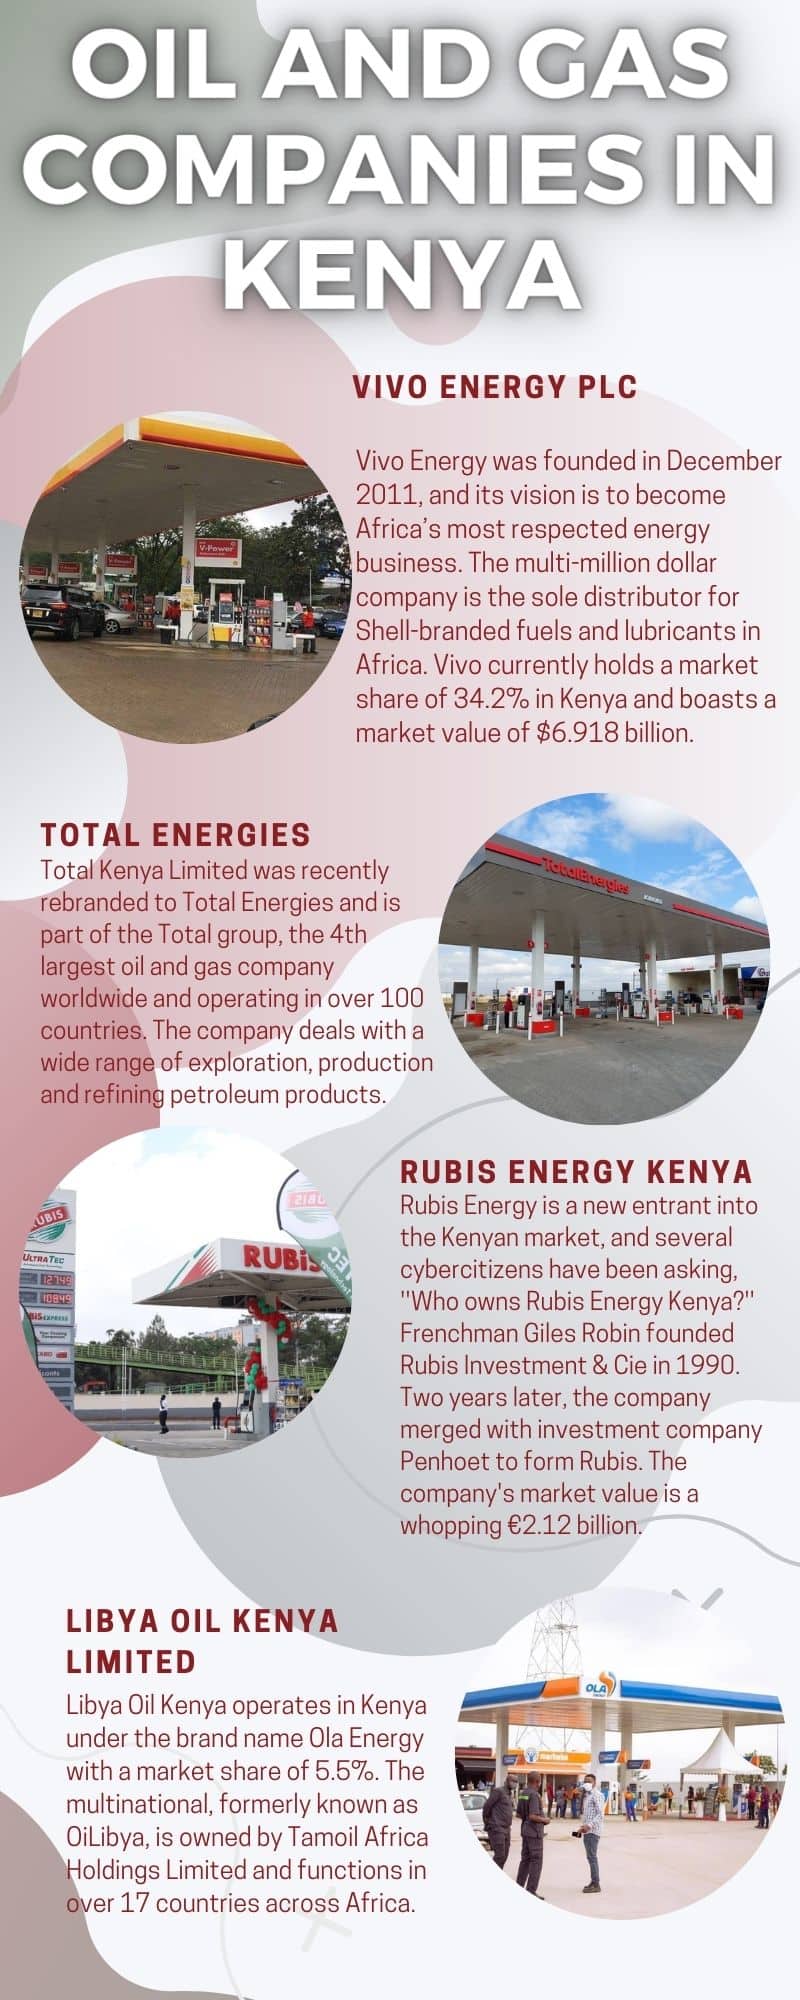 Oil and gas companies in Kenya